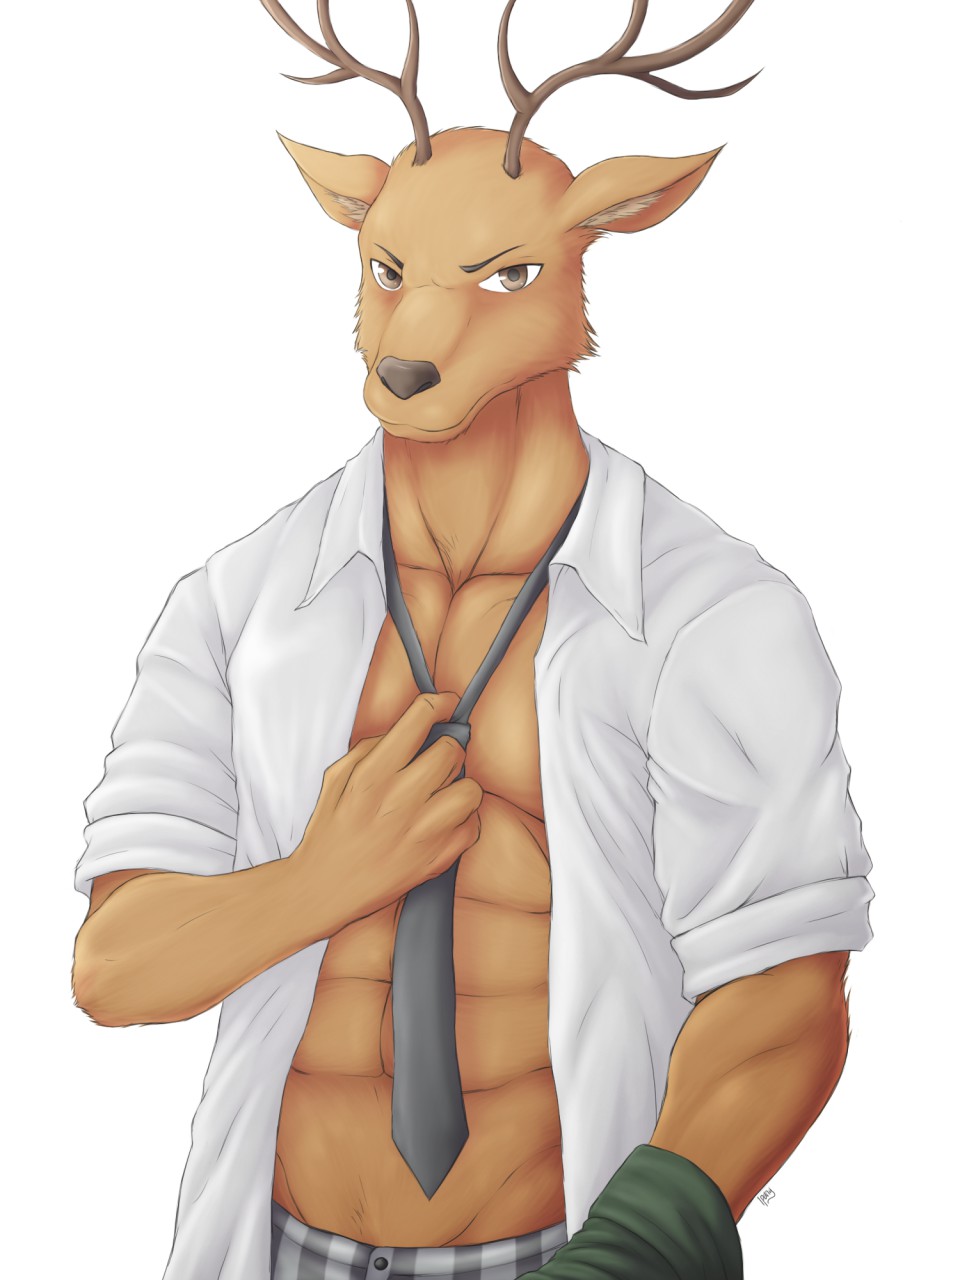 I tried to draw Louis Senpai as today's drawgust prompt was Deer